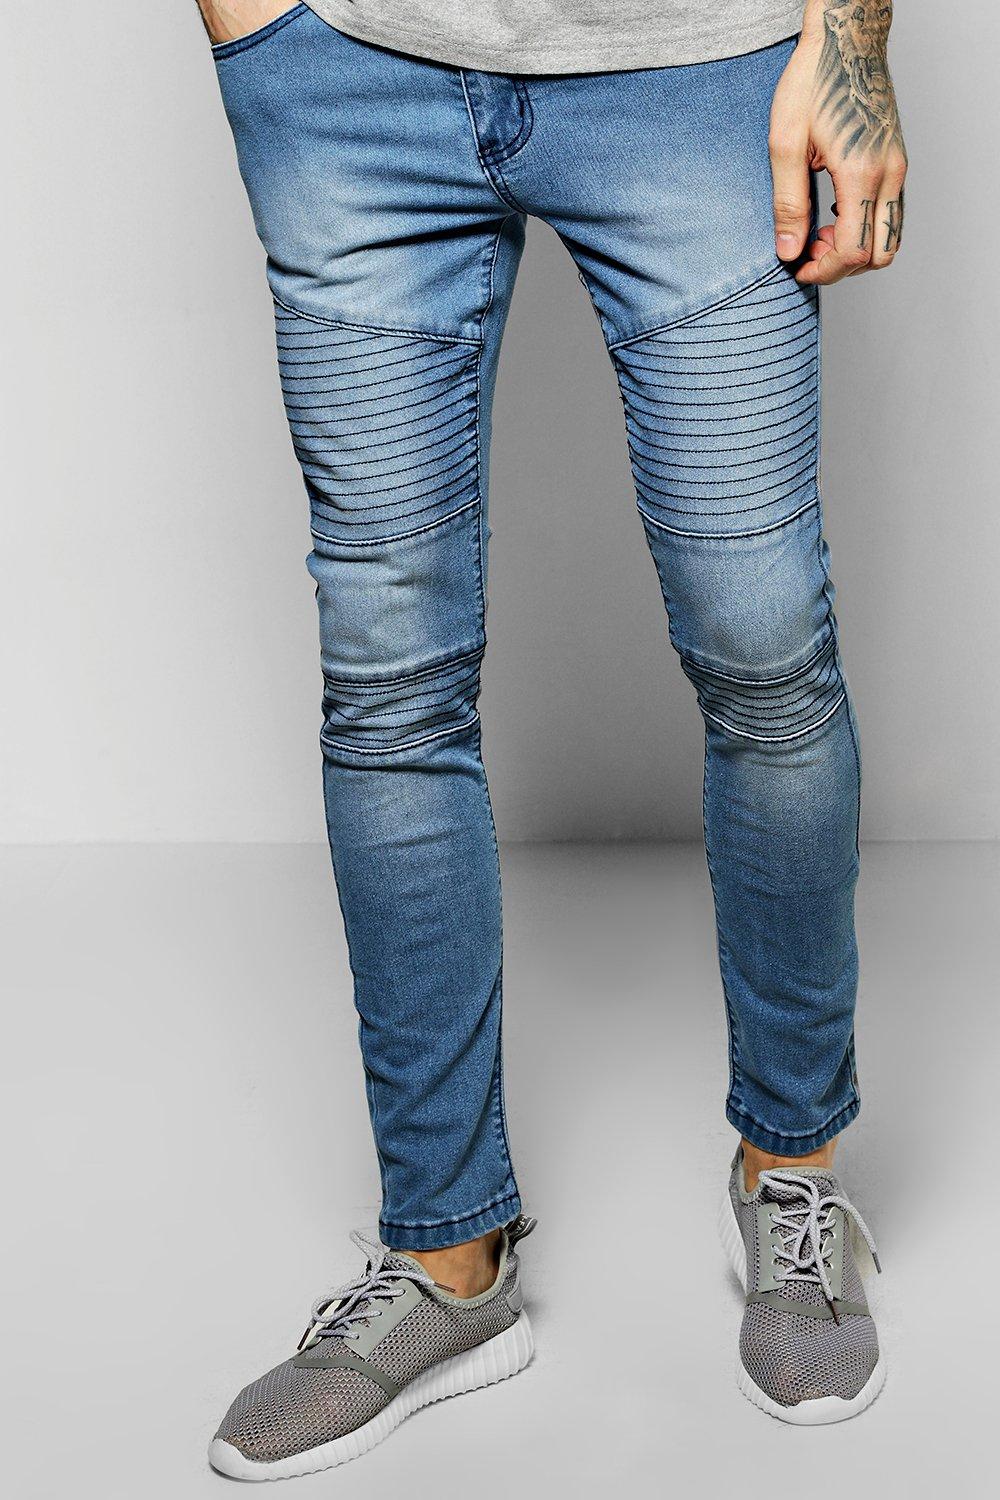 levis 514 with flap pockets